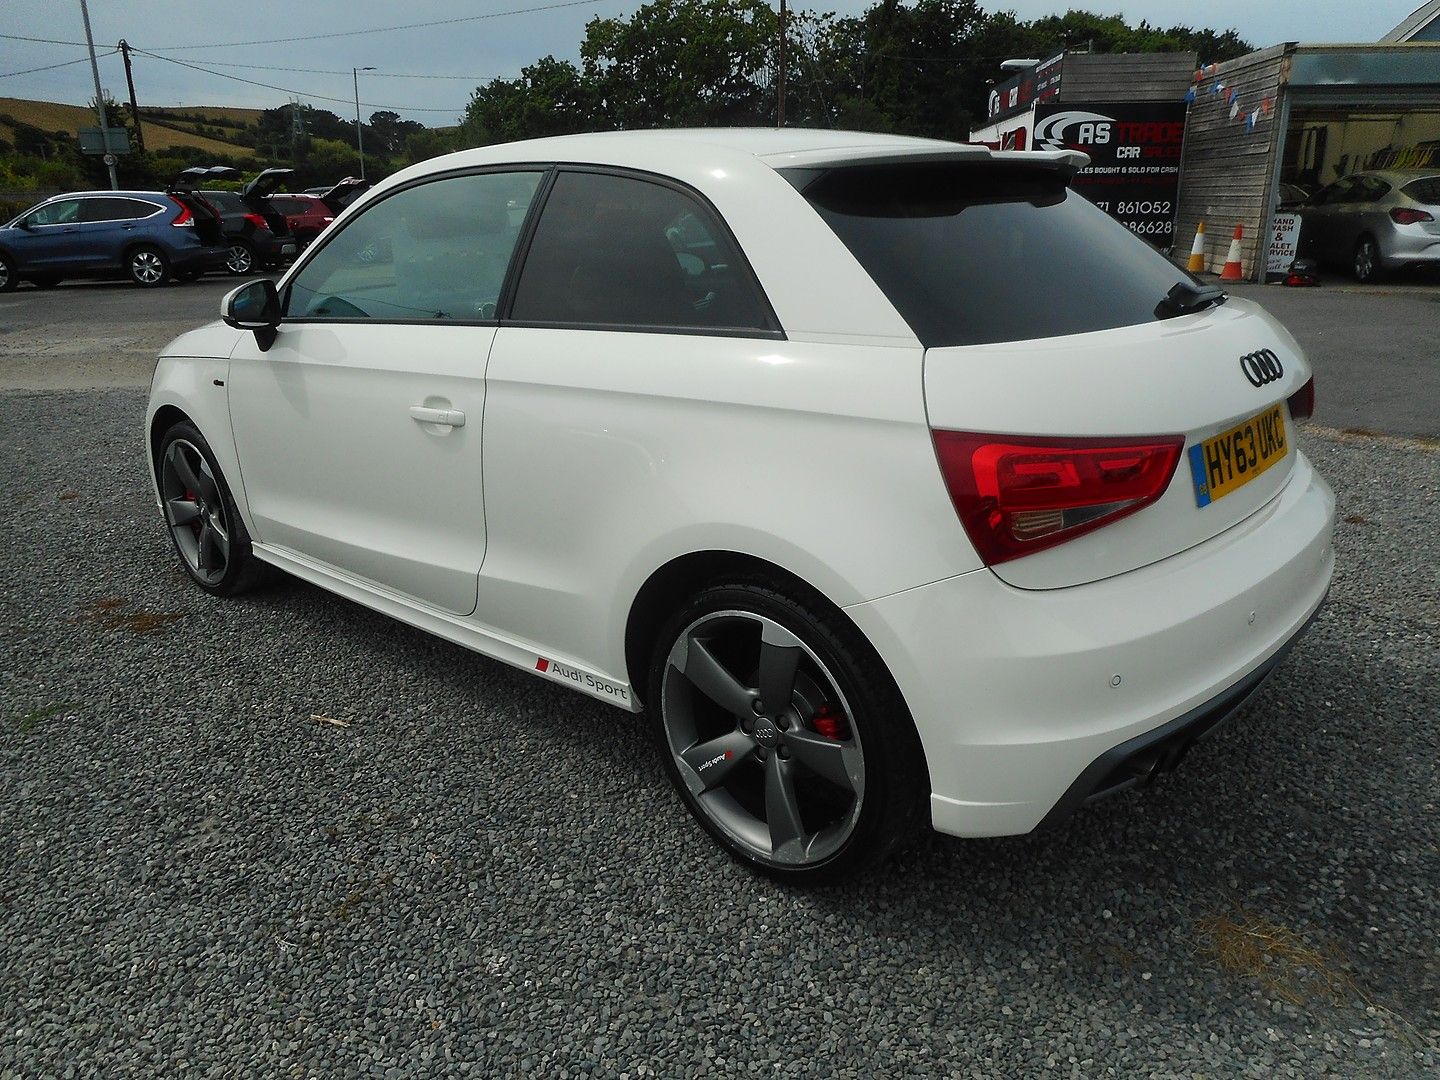 AUDI A1 1.4 TFSI Black Edition 185PS S tronic (2013) - Picture 4